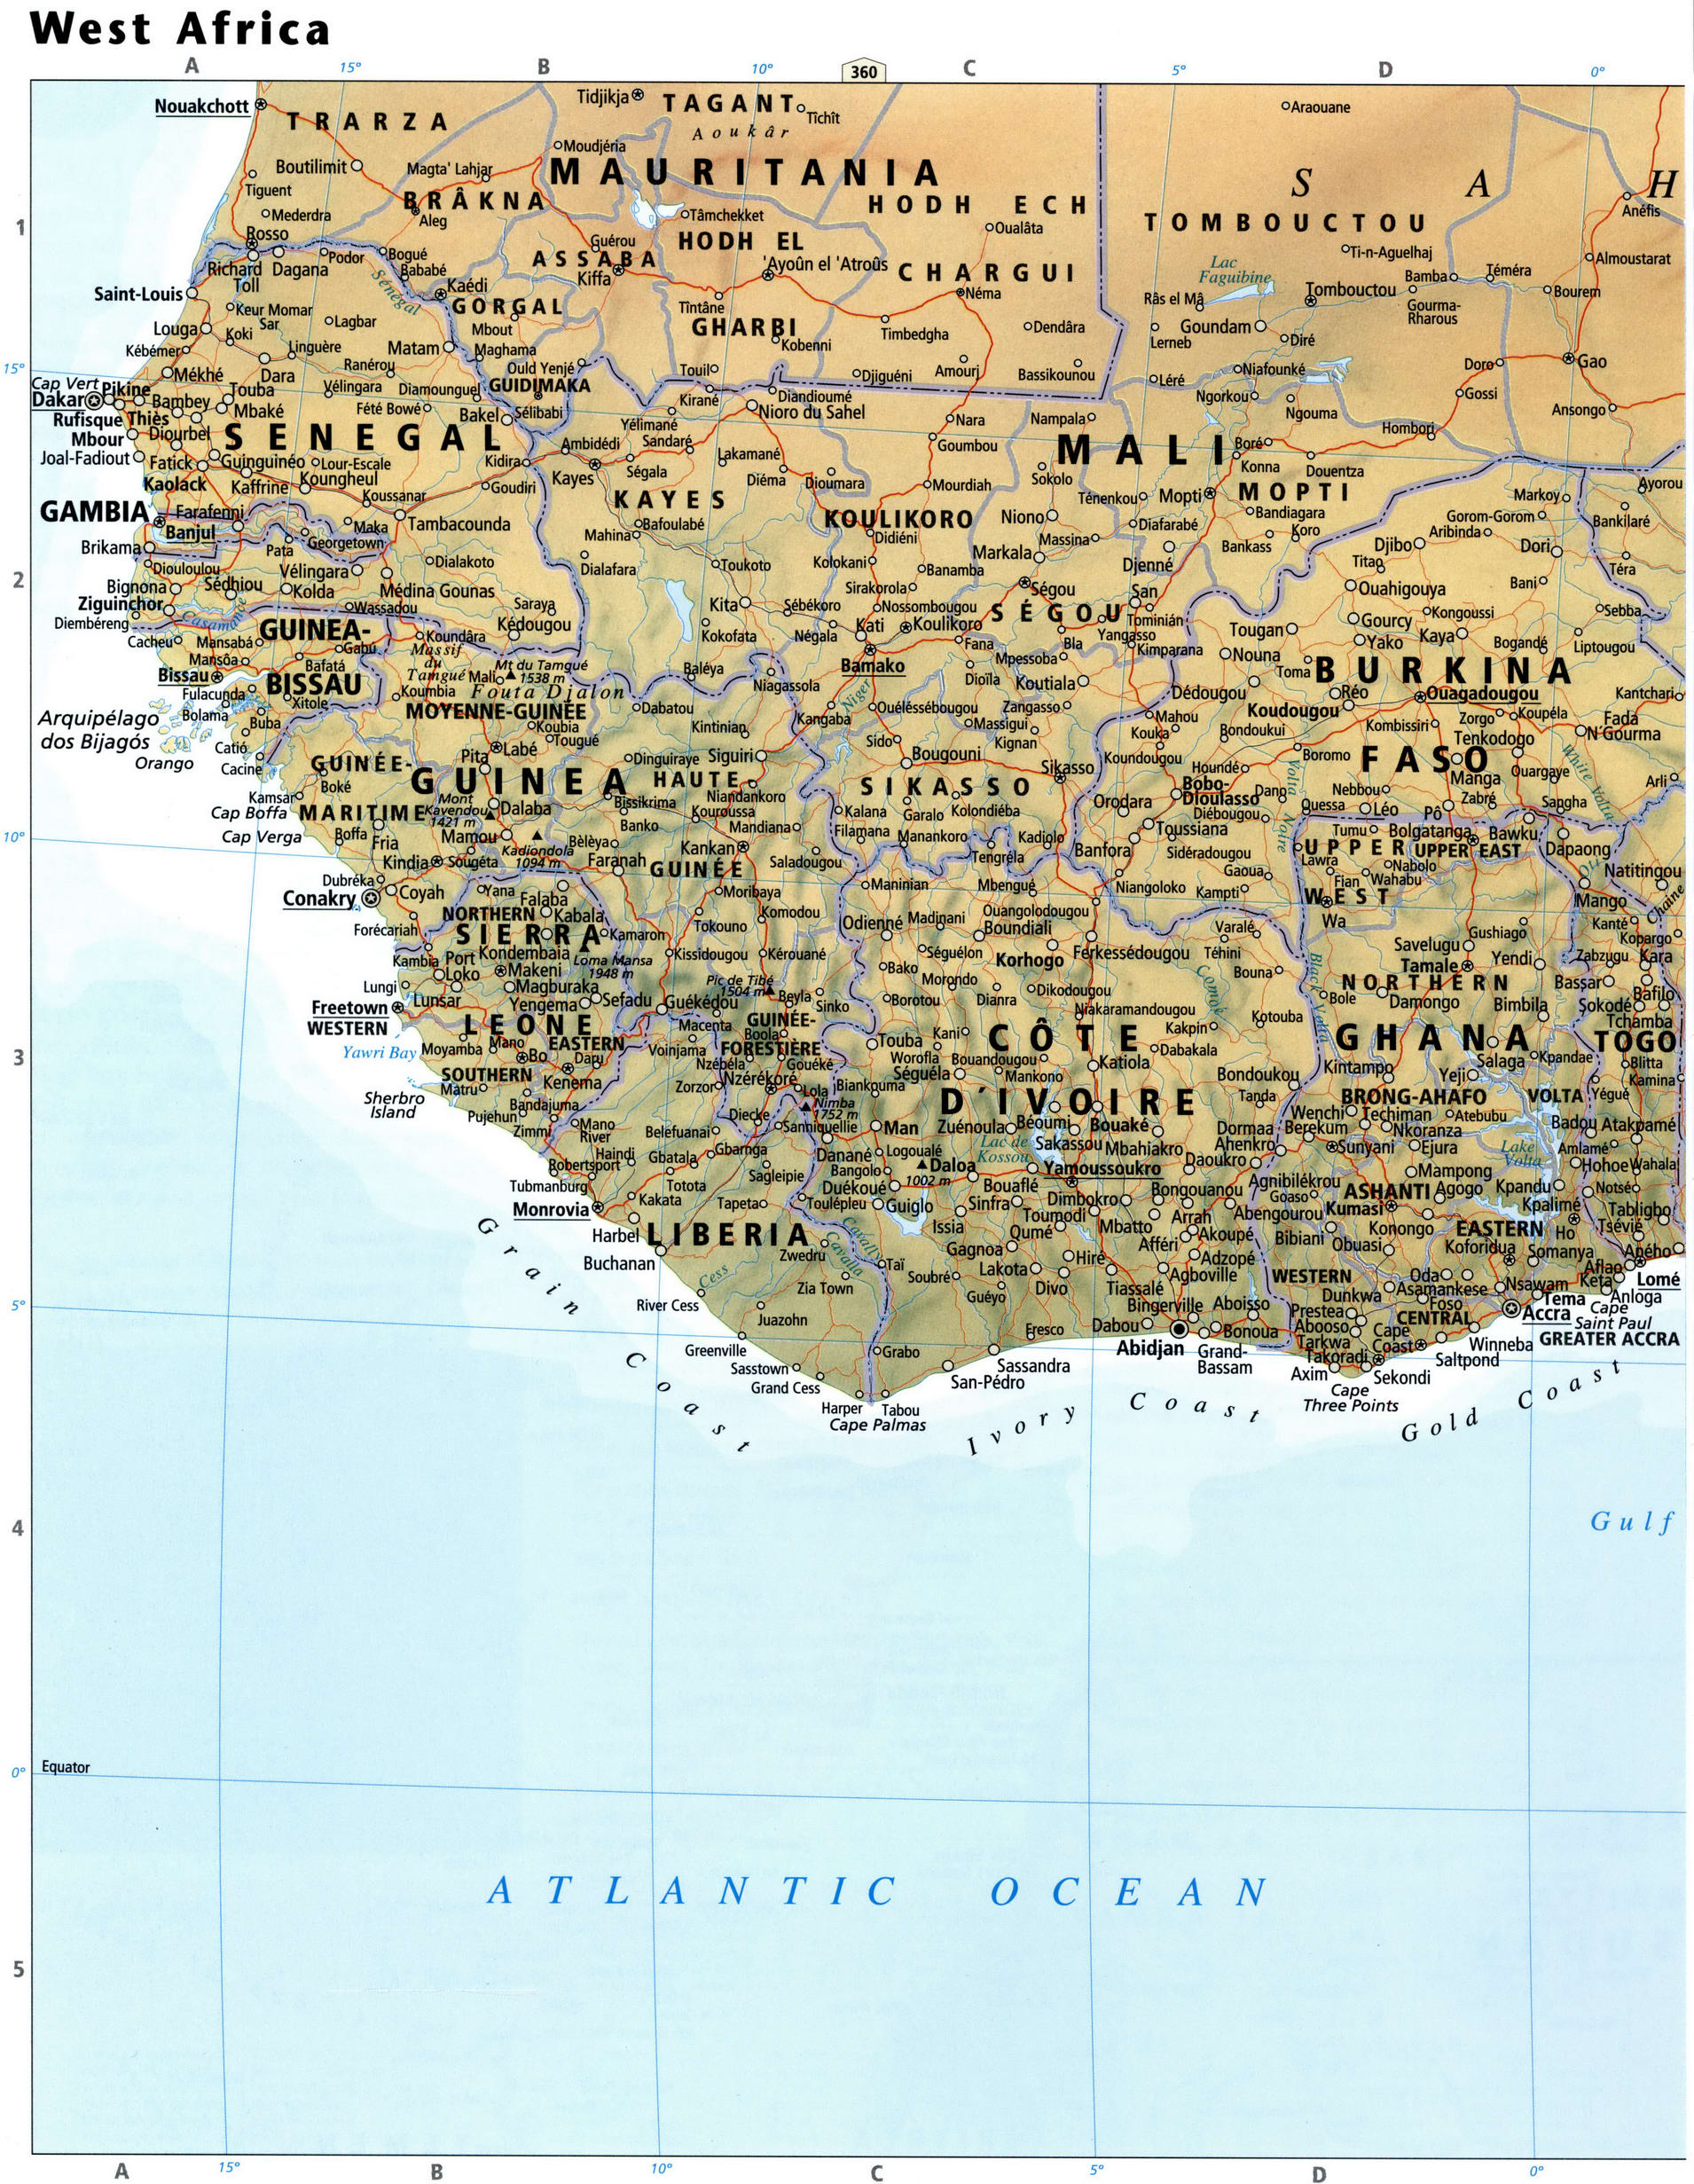 West Africa physical map